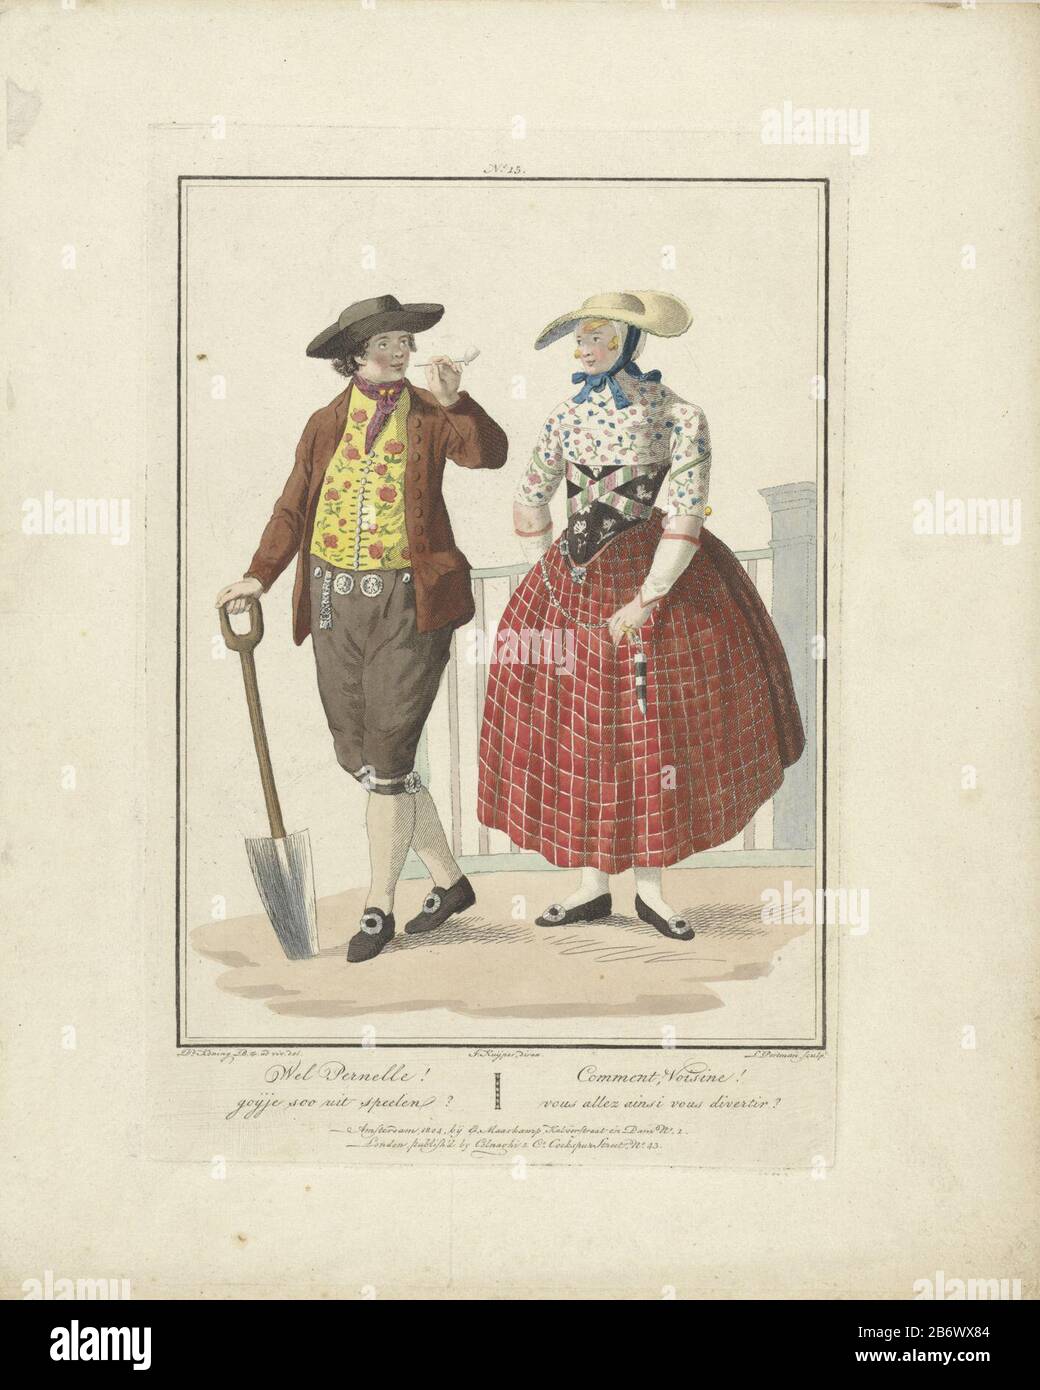 Jong paar bij een hek Wel Pernelle goijje soo uit speelen Comment, Voisine vous allez ainsi vous divertir (titel op object) A young woman in plaid skirt and floral top and hat, standing next to a gentleman with pipe and spade. Manufacturer : printmaker: Ludwig Gottlieb Portman (listed building) supervision: Jacques Kuyper (listed building) for drawing D. Bz. King (listed building) publisher Evert Maaskamp (listed building) publisher: Colnaghi & Co (listed property) Place manufacture: printmaker: Amsterdam Publisher: Amsterdam Publisher: London Date: 1803 - 1807 Physical features: stippelets an Stock Photo